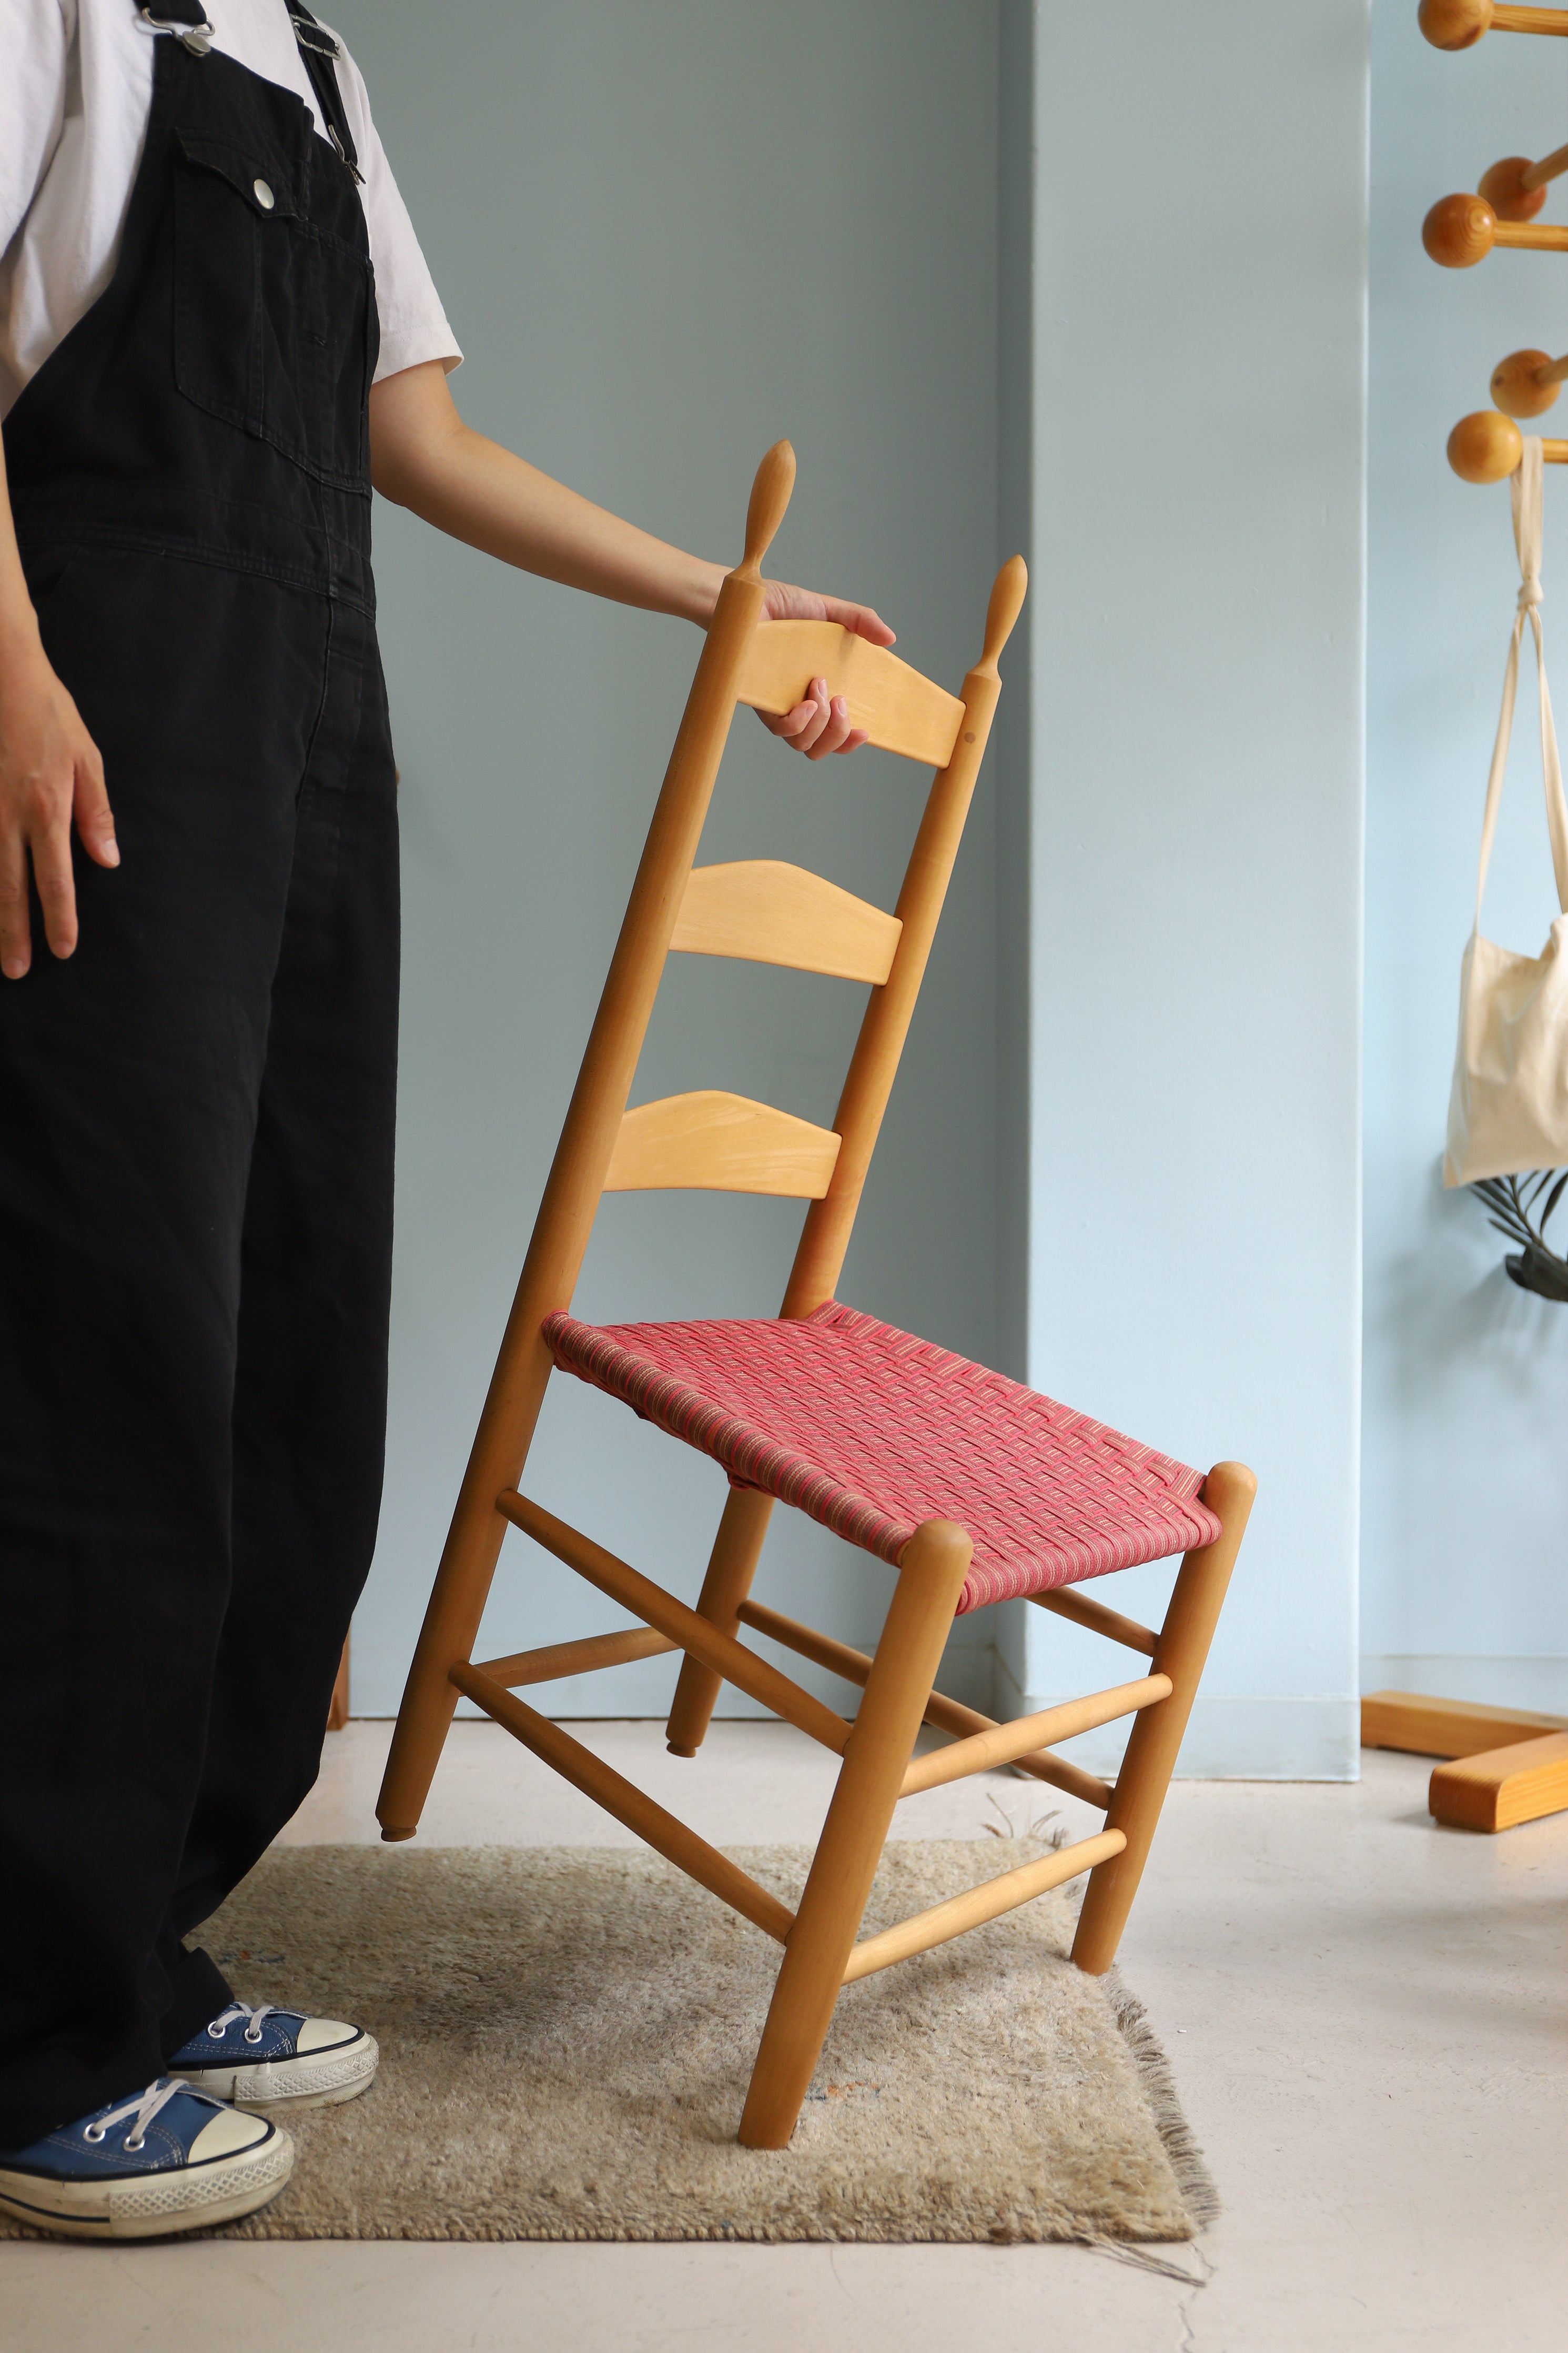 Unoh Furniture Workshop Shaker Style Chair/宇納家具工房 シェーカースタイル チェア 椅子